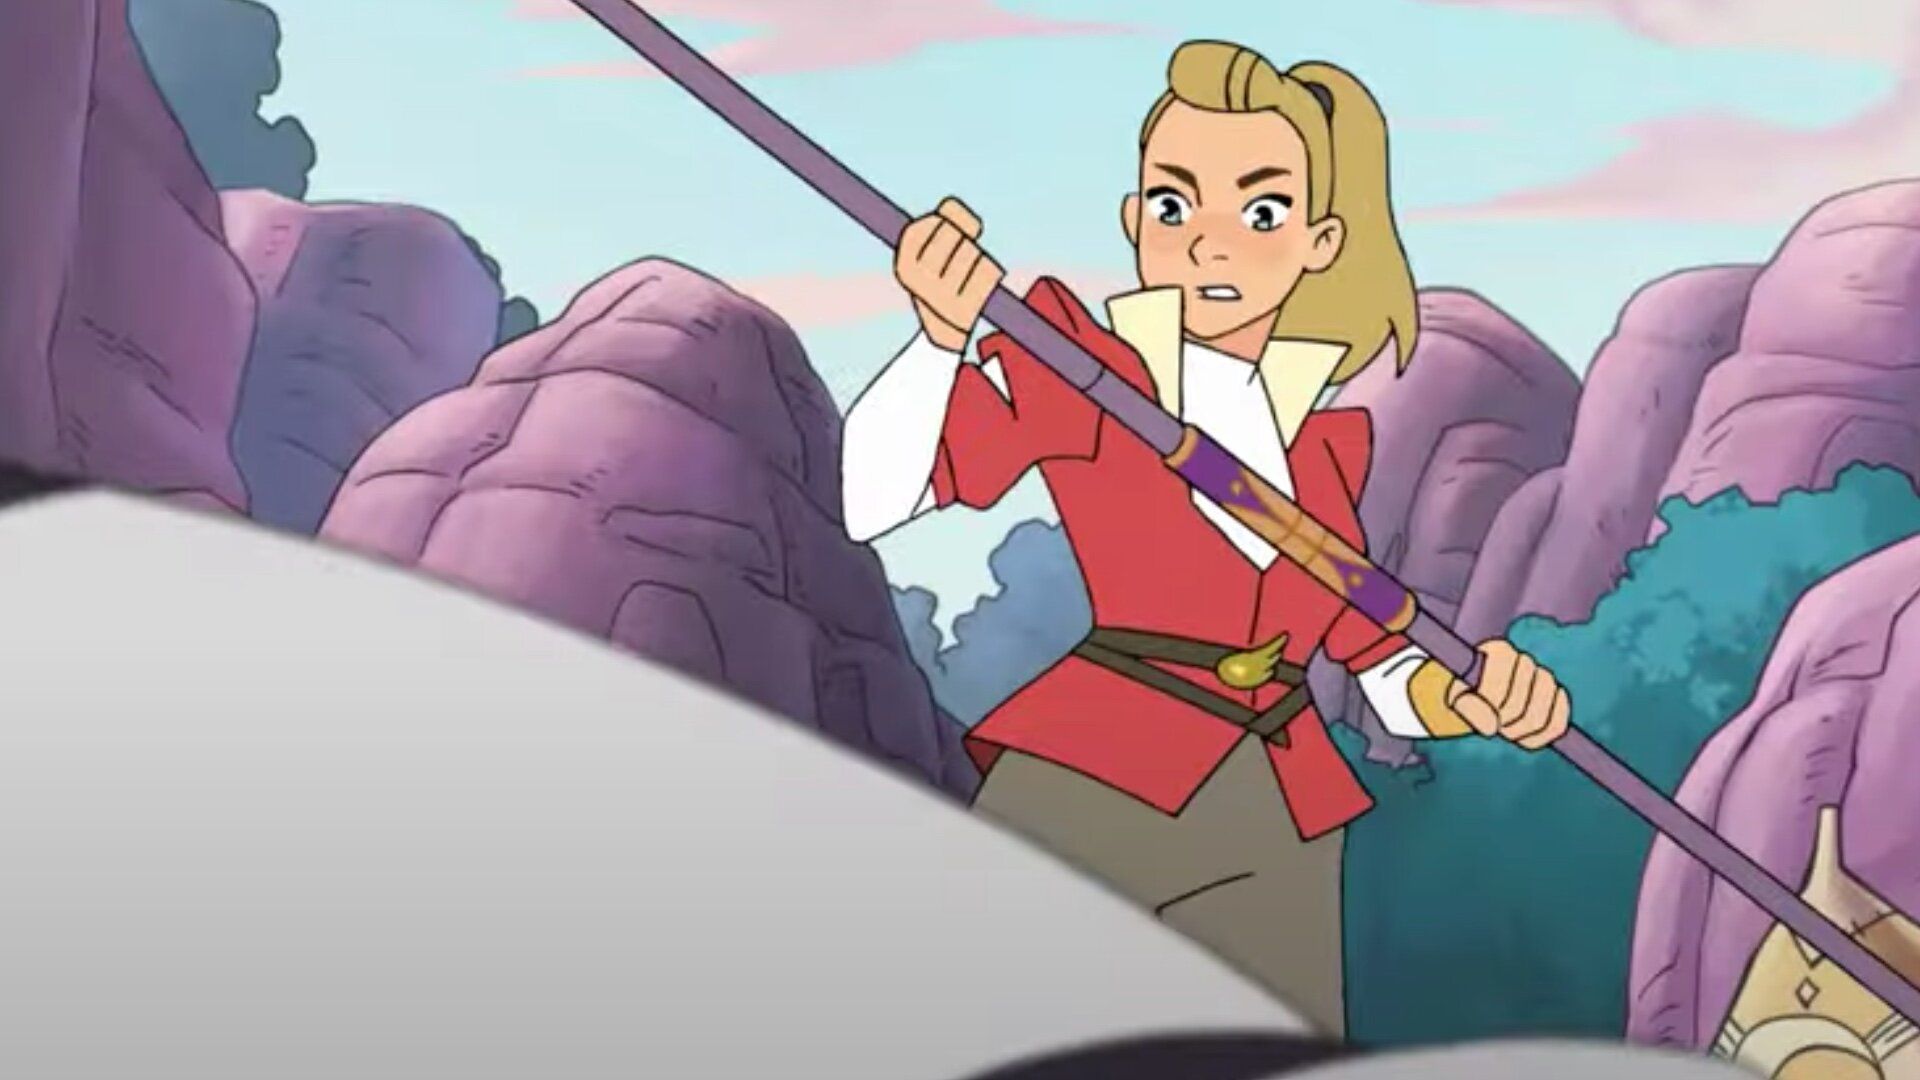 SHE RA AND THE PRINCESSES OF POWER Gets A Exciting And Dramatic